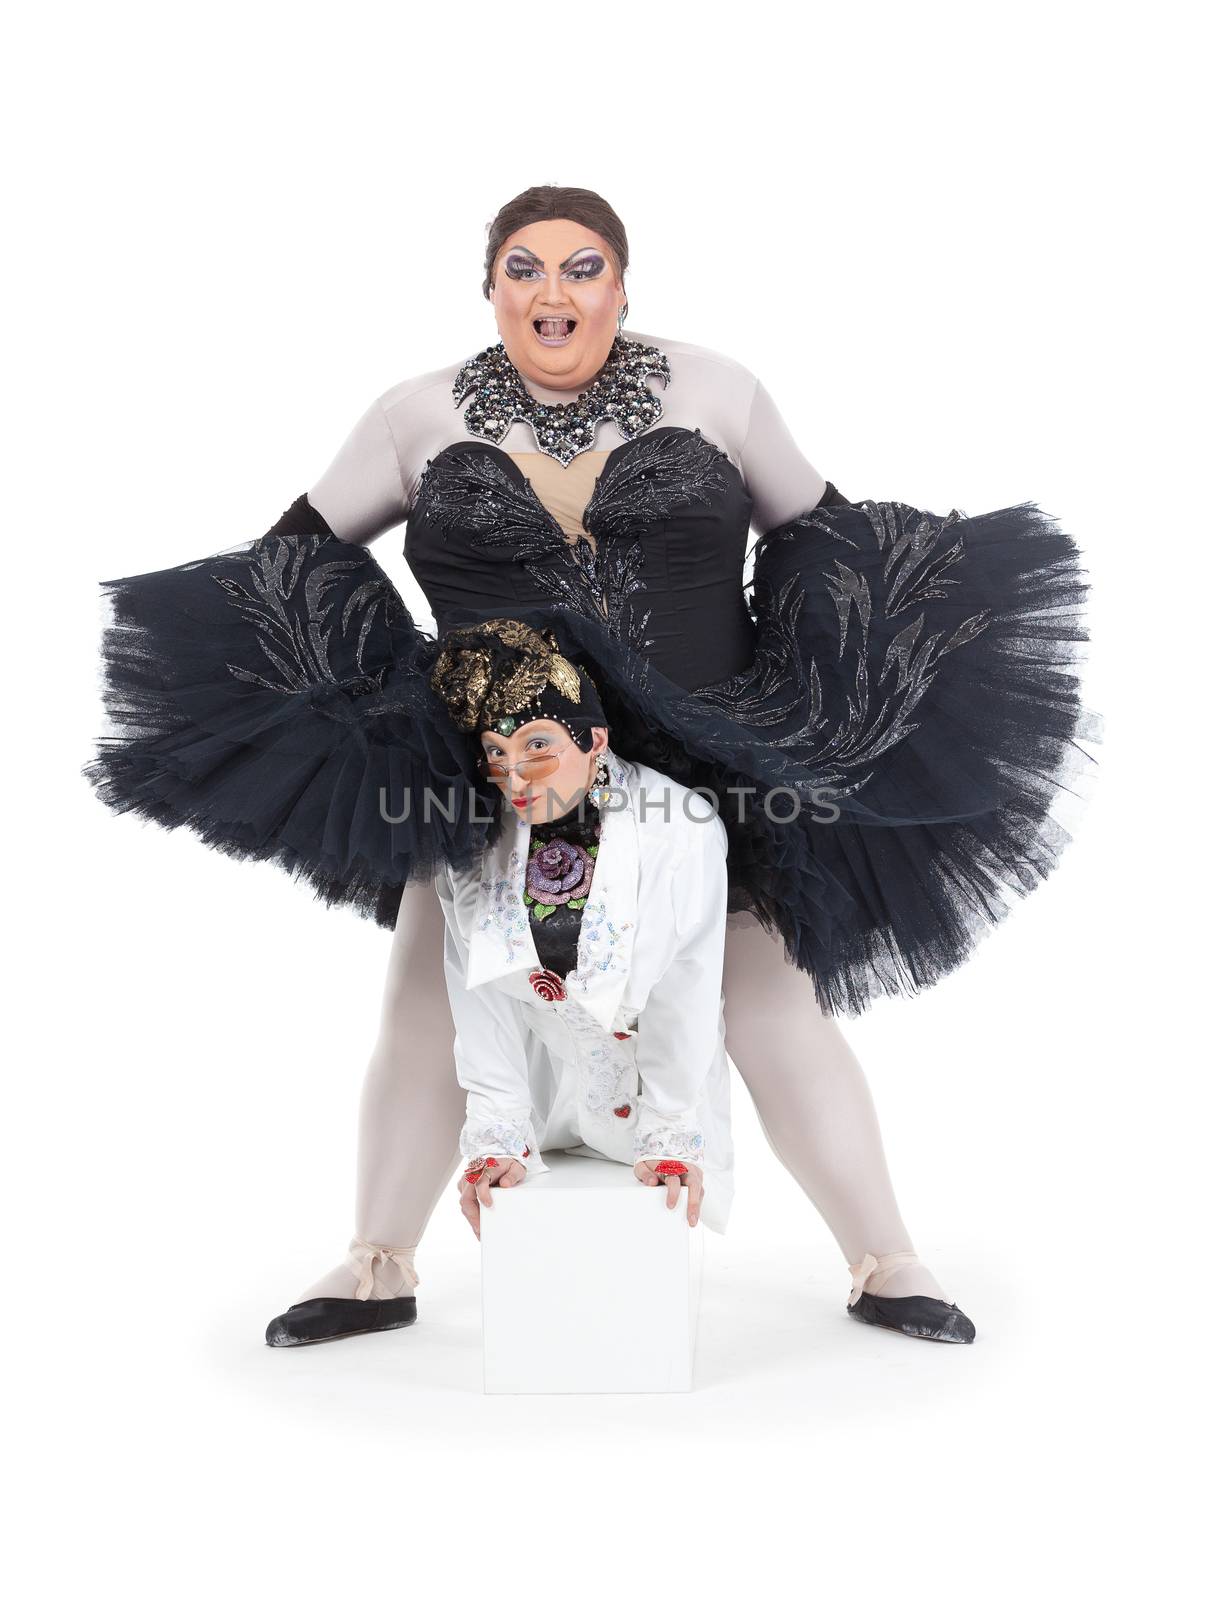 Two drag queens performing together by Discovod